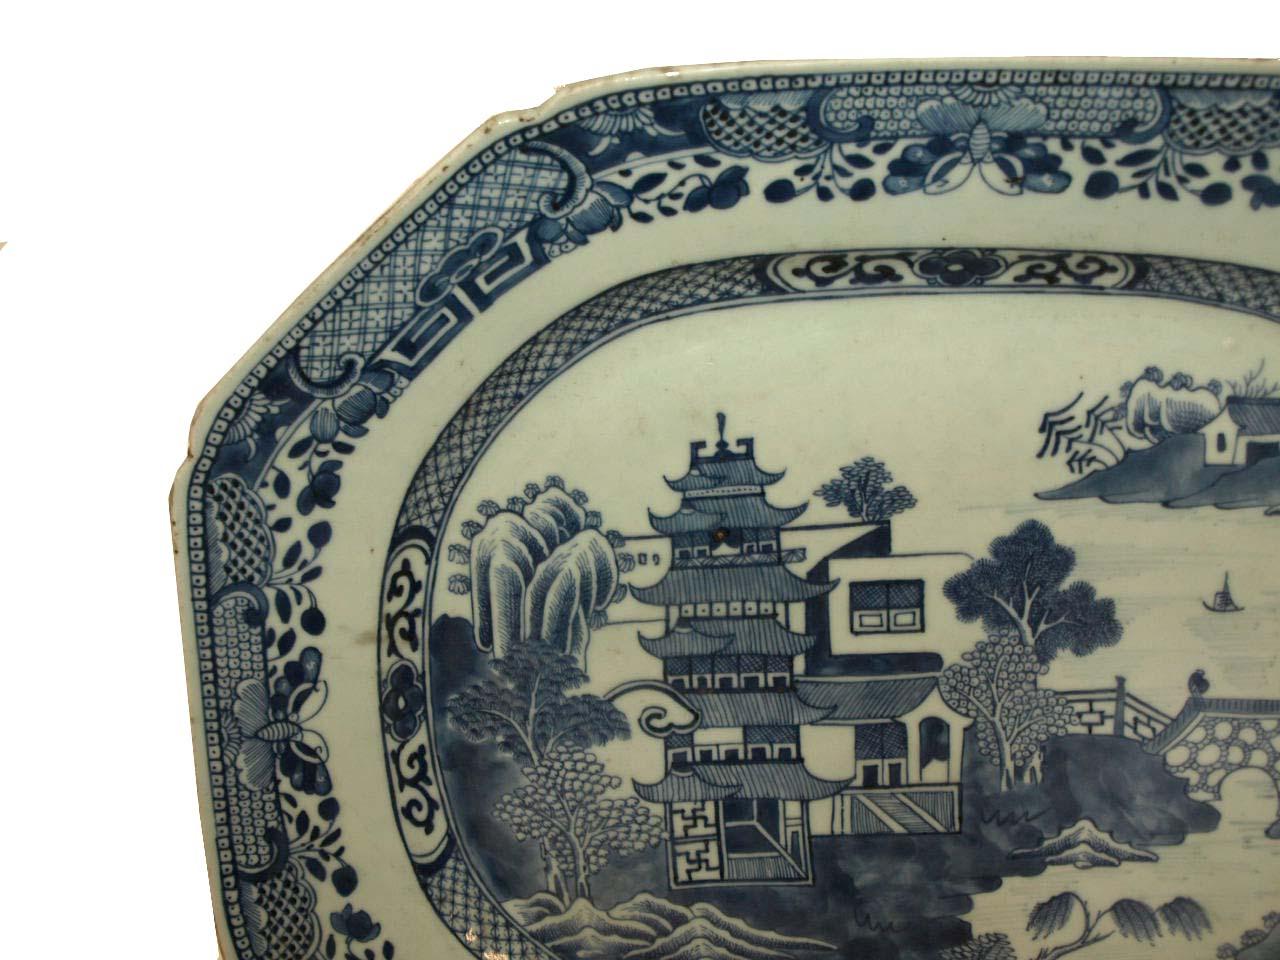 Chinese blue and white platter from the early 19th century, the border with various foliate work, the interior of the platter featuring the classic landscape of pagotas, river and bridge. This platter is in very good condition.